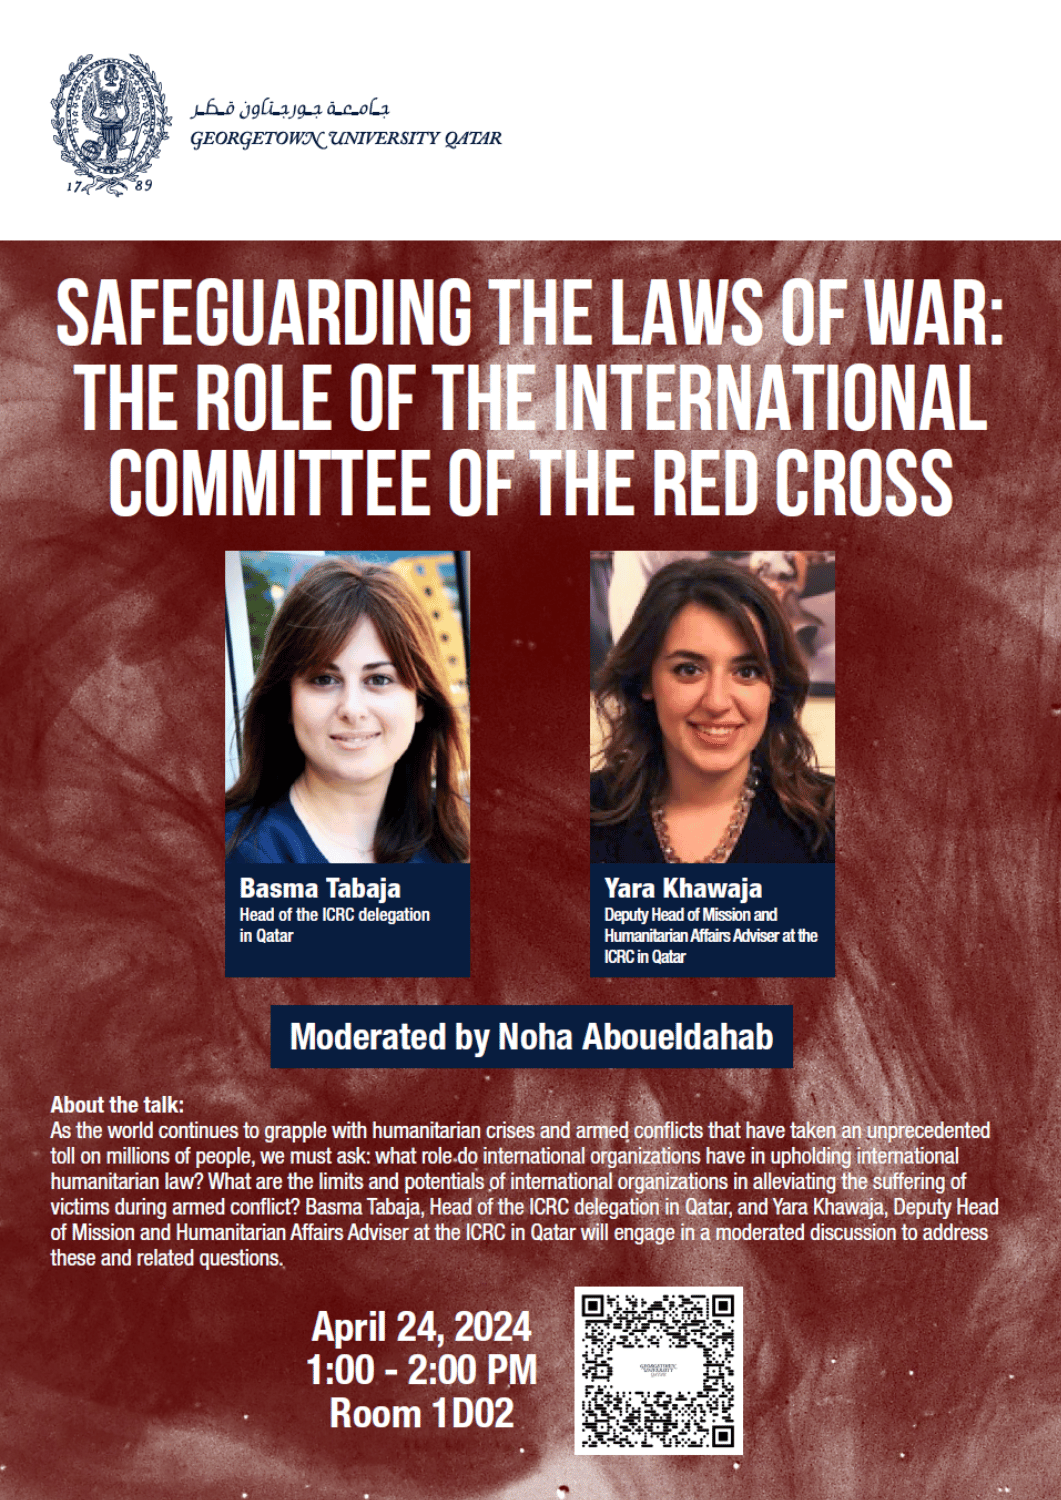 Safeguarding the Laws of War: The Role of the International Committee of the Red Cross